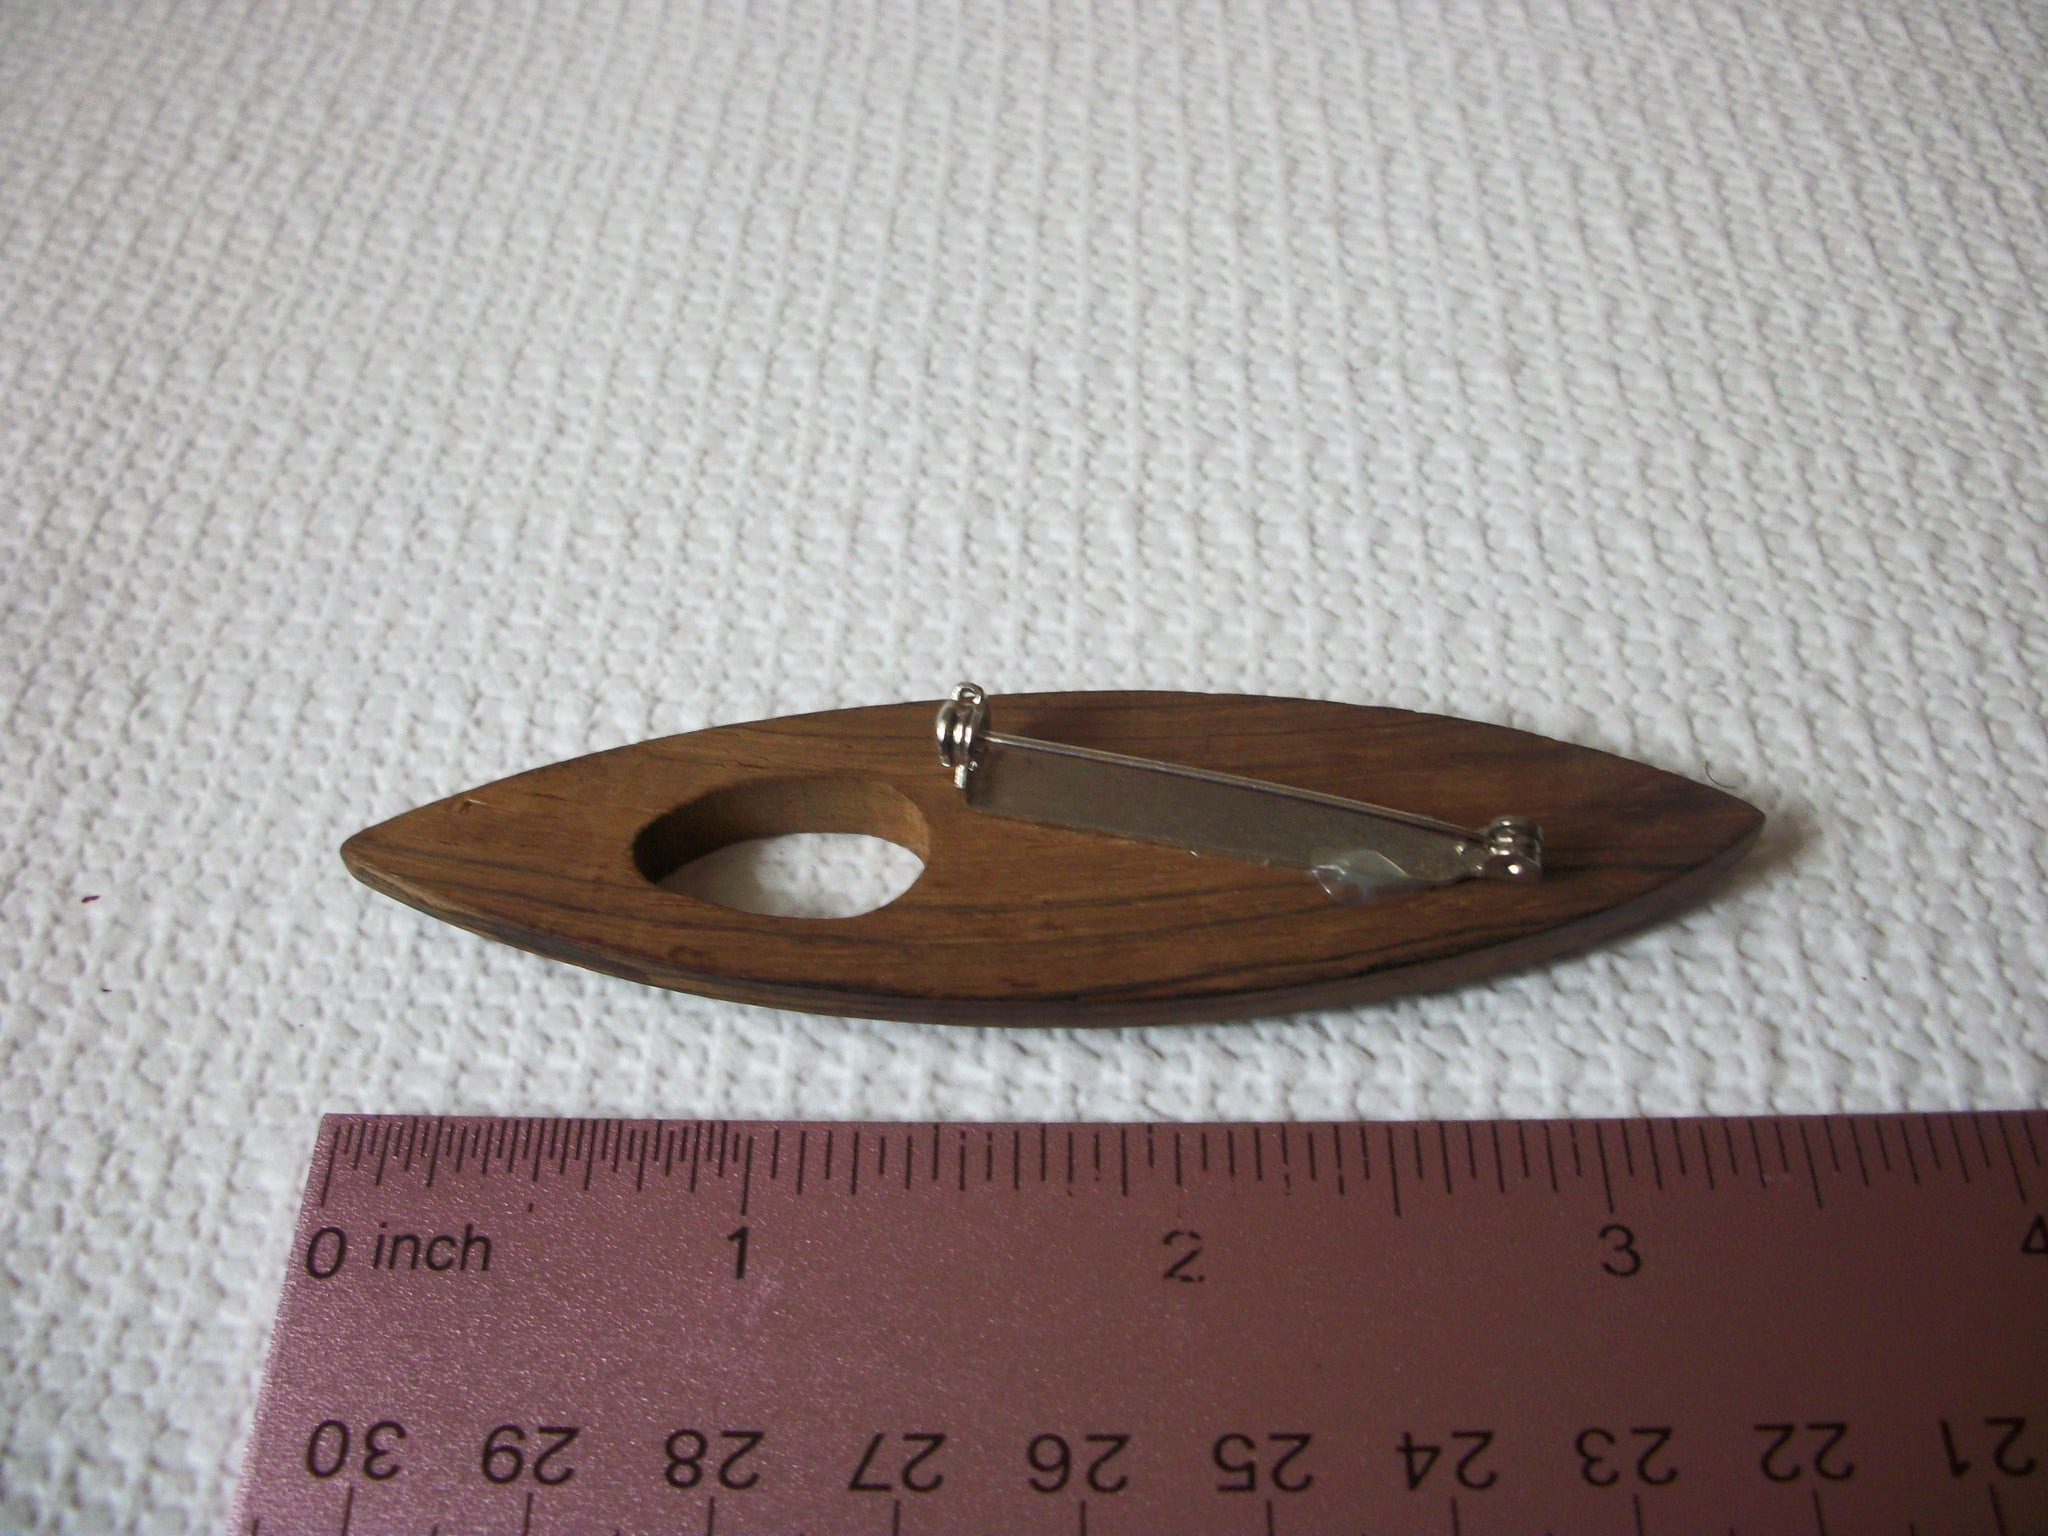 Long Hand Crafted Vintage Wood Brooch 42120